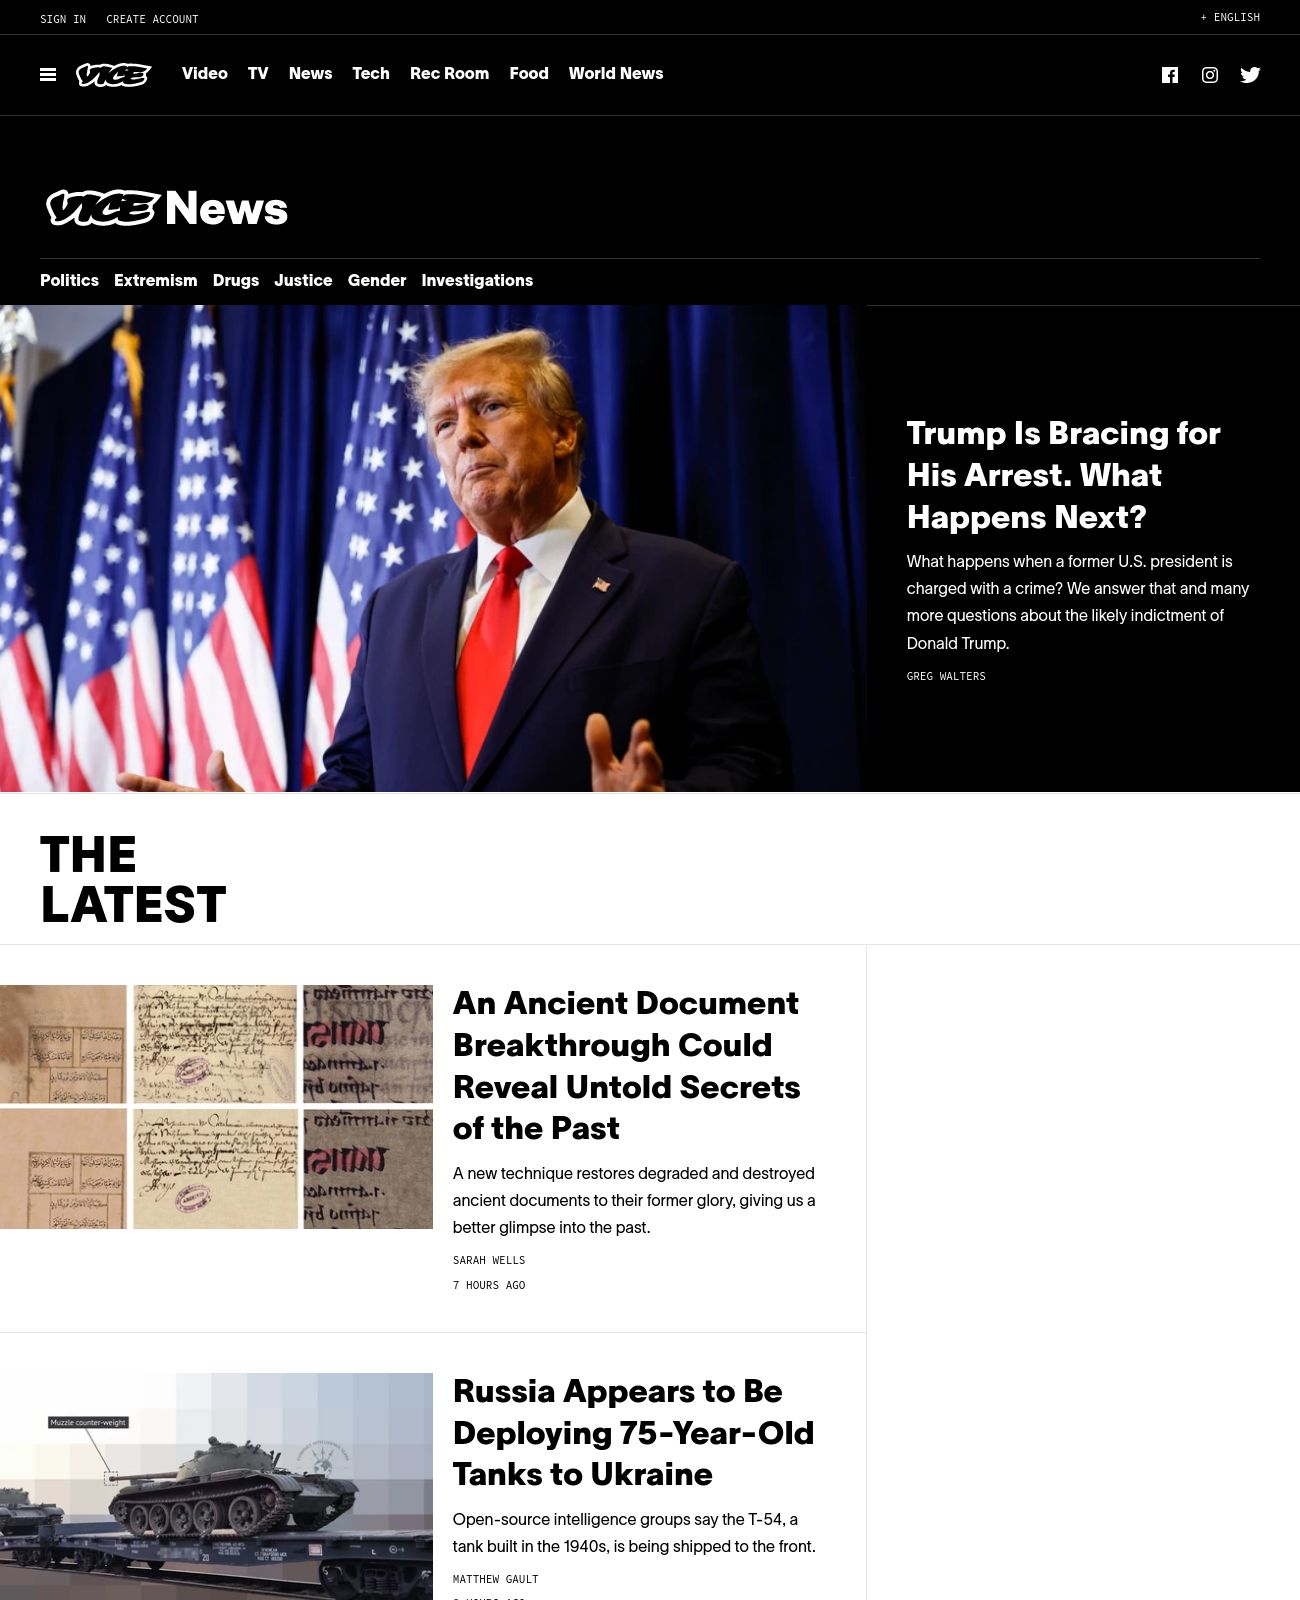 Vice News at 2023-03-22 20:41:42-04:00 local time